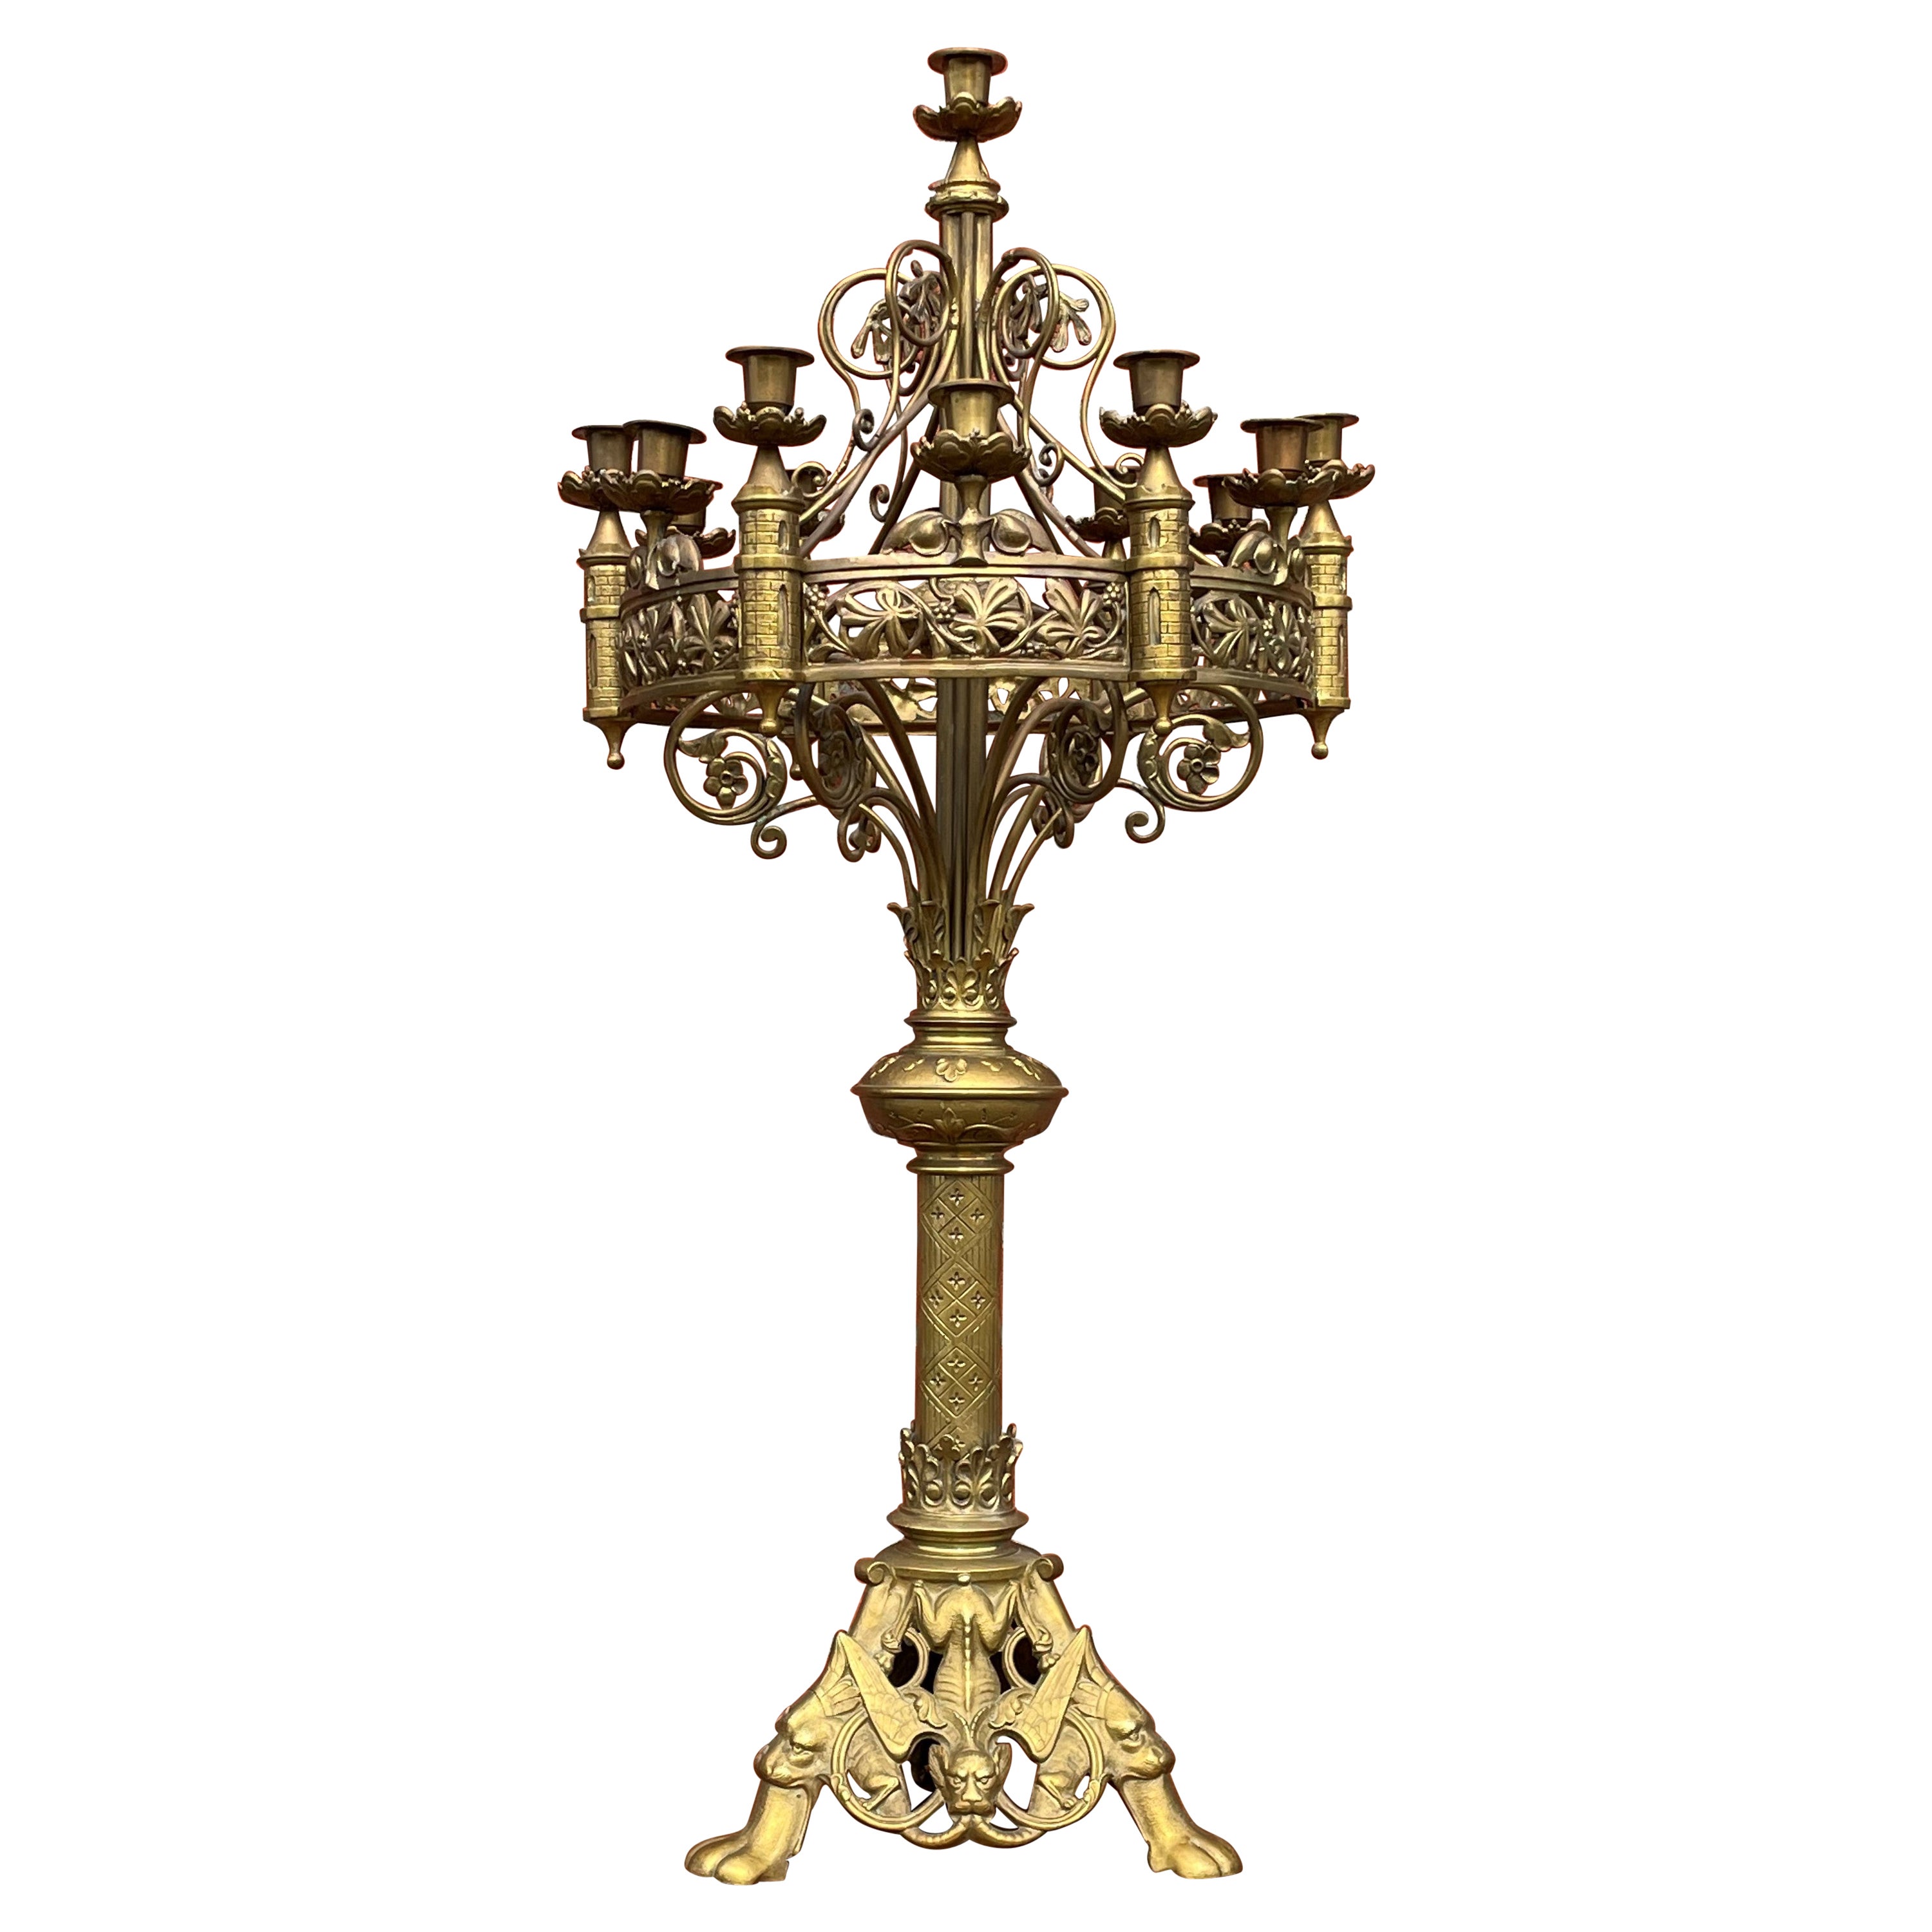 Antique Gothic Revival Bronze 13 Candle Table or Floor Candelabra with Gargoyles For Sale